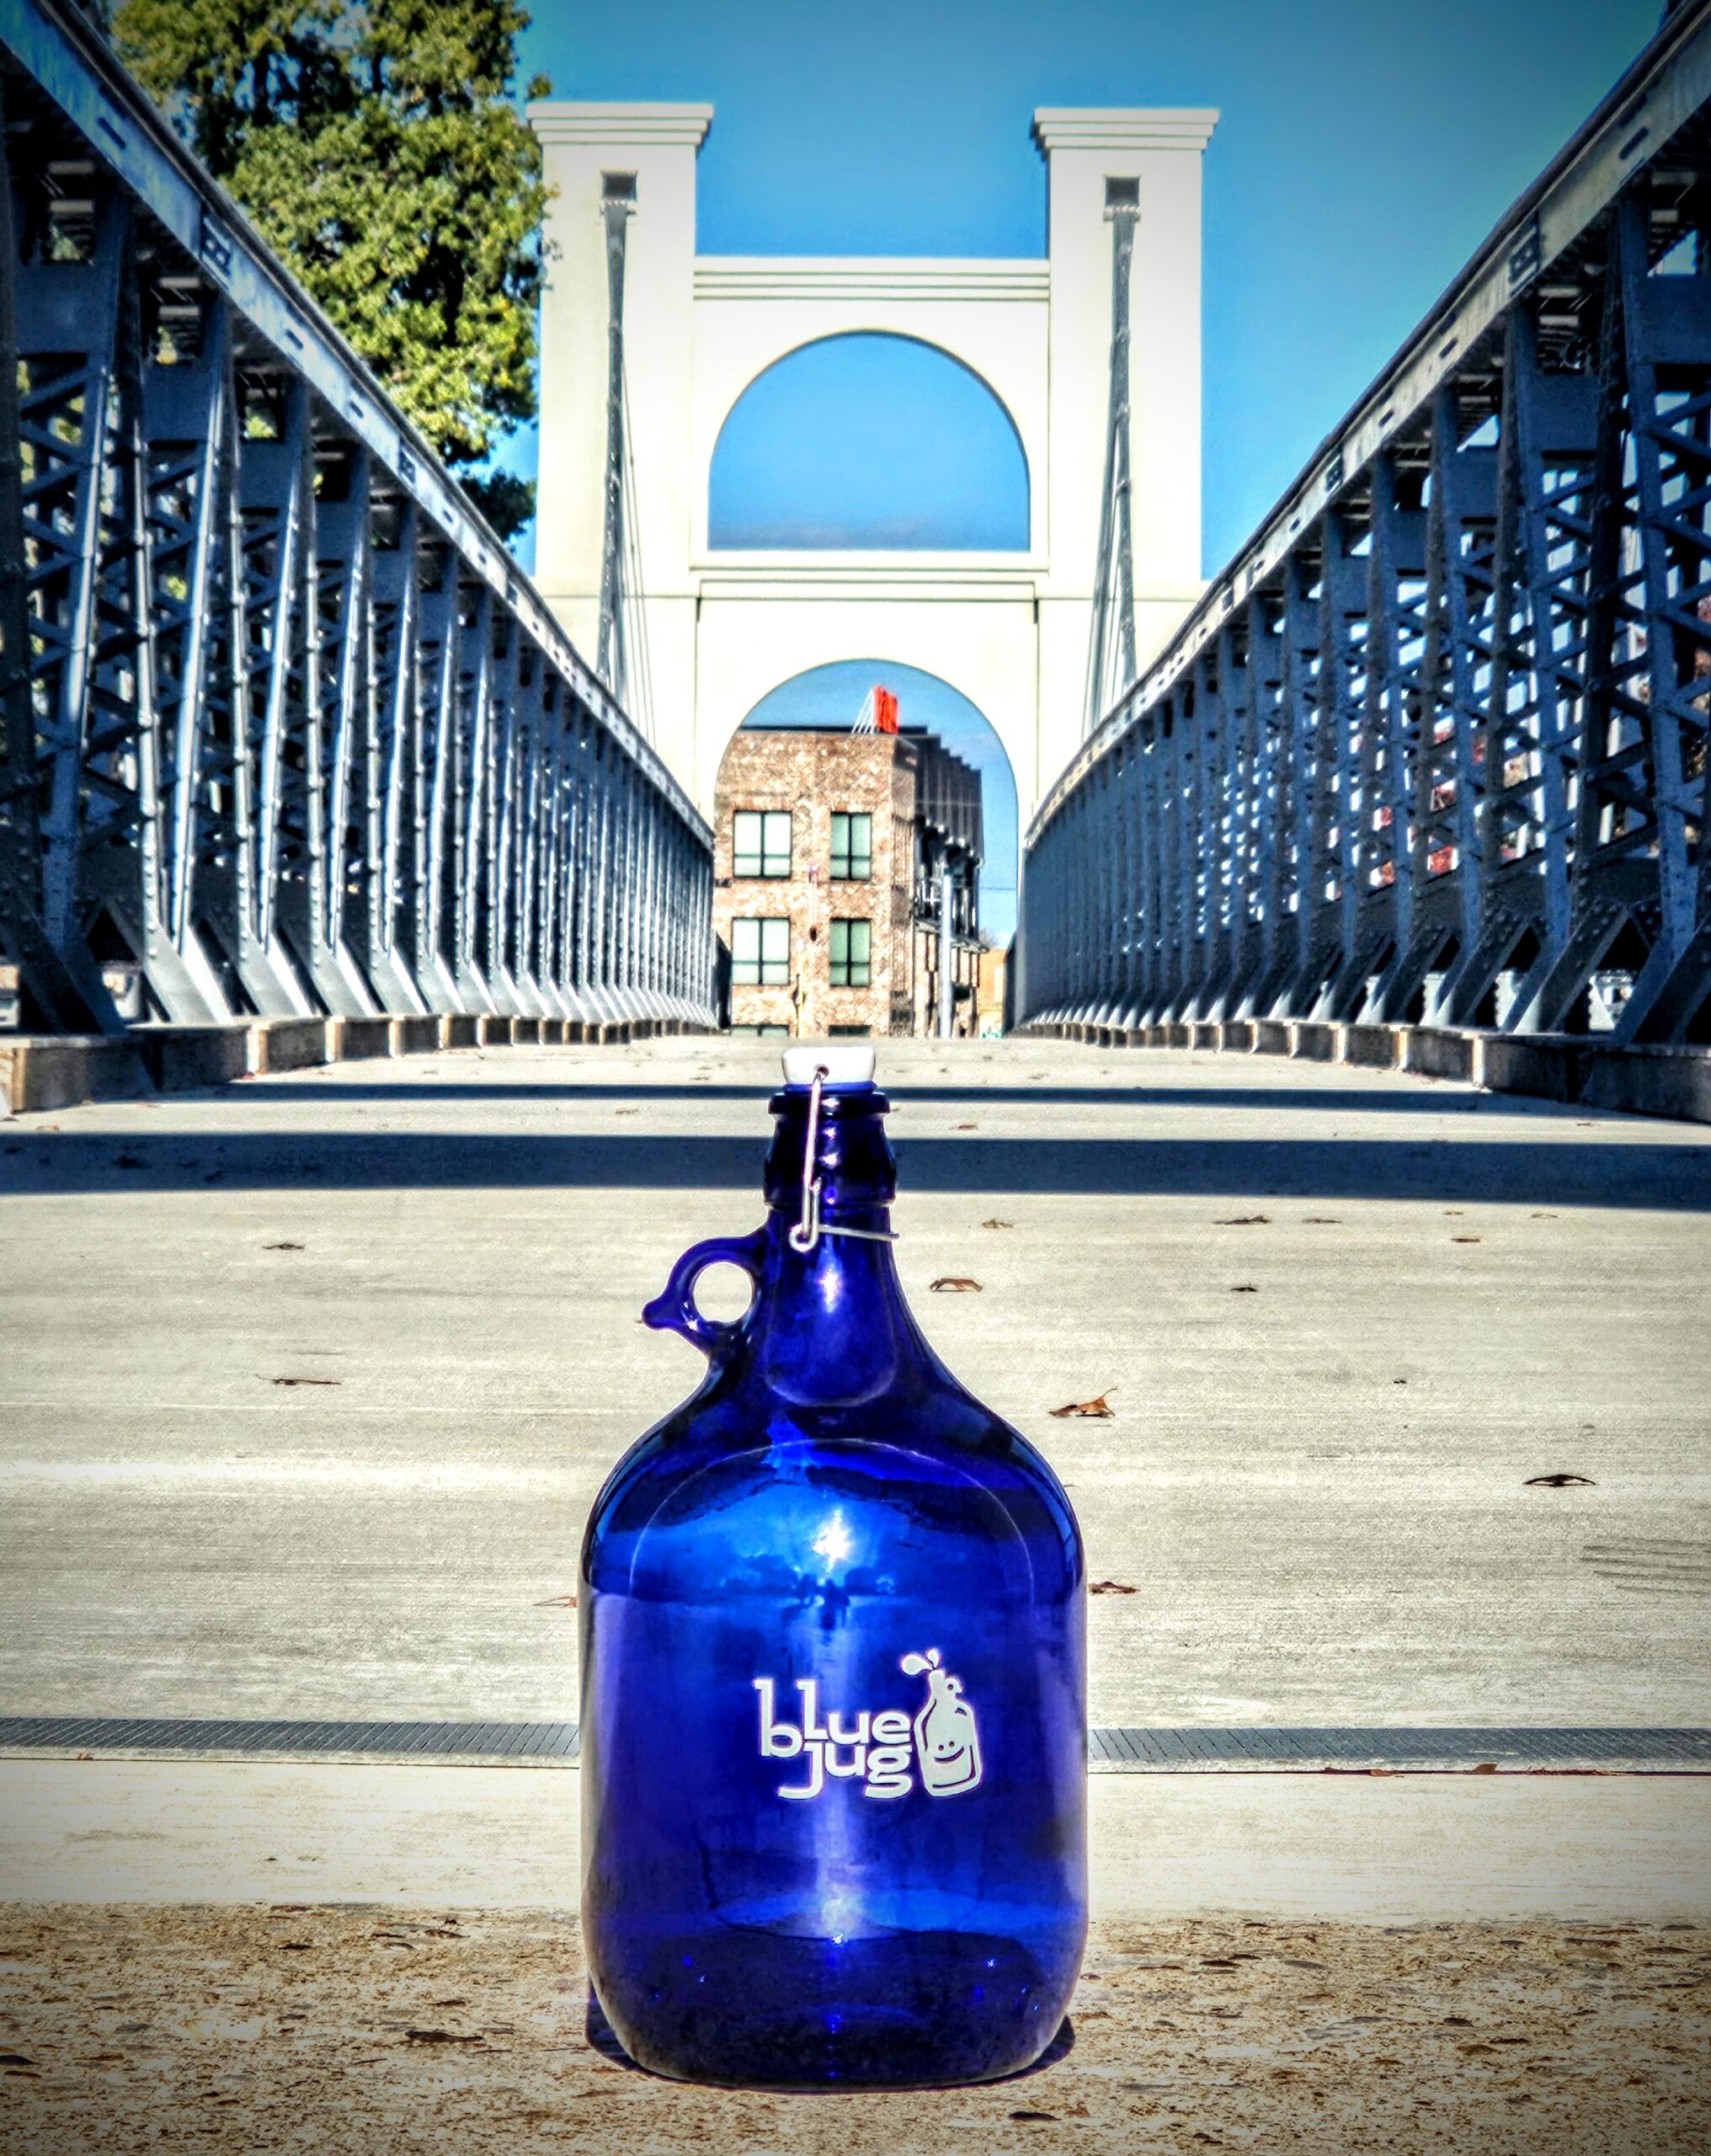 A dark blue can placed on a suspension bridge with "Blue Jug Waco" Logo on it